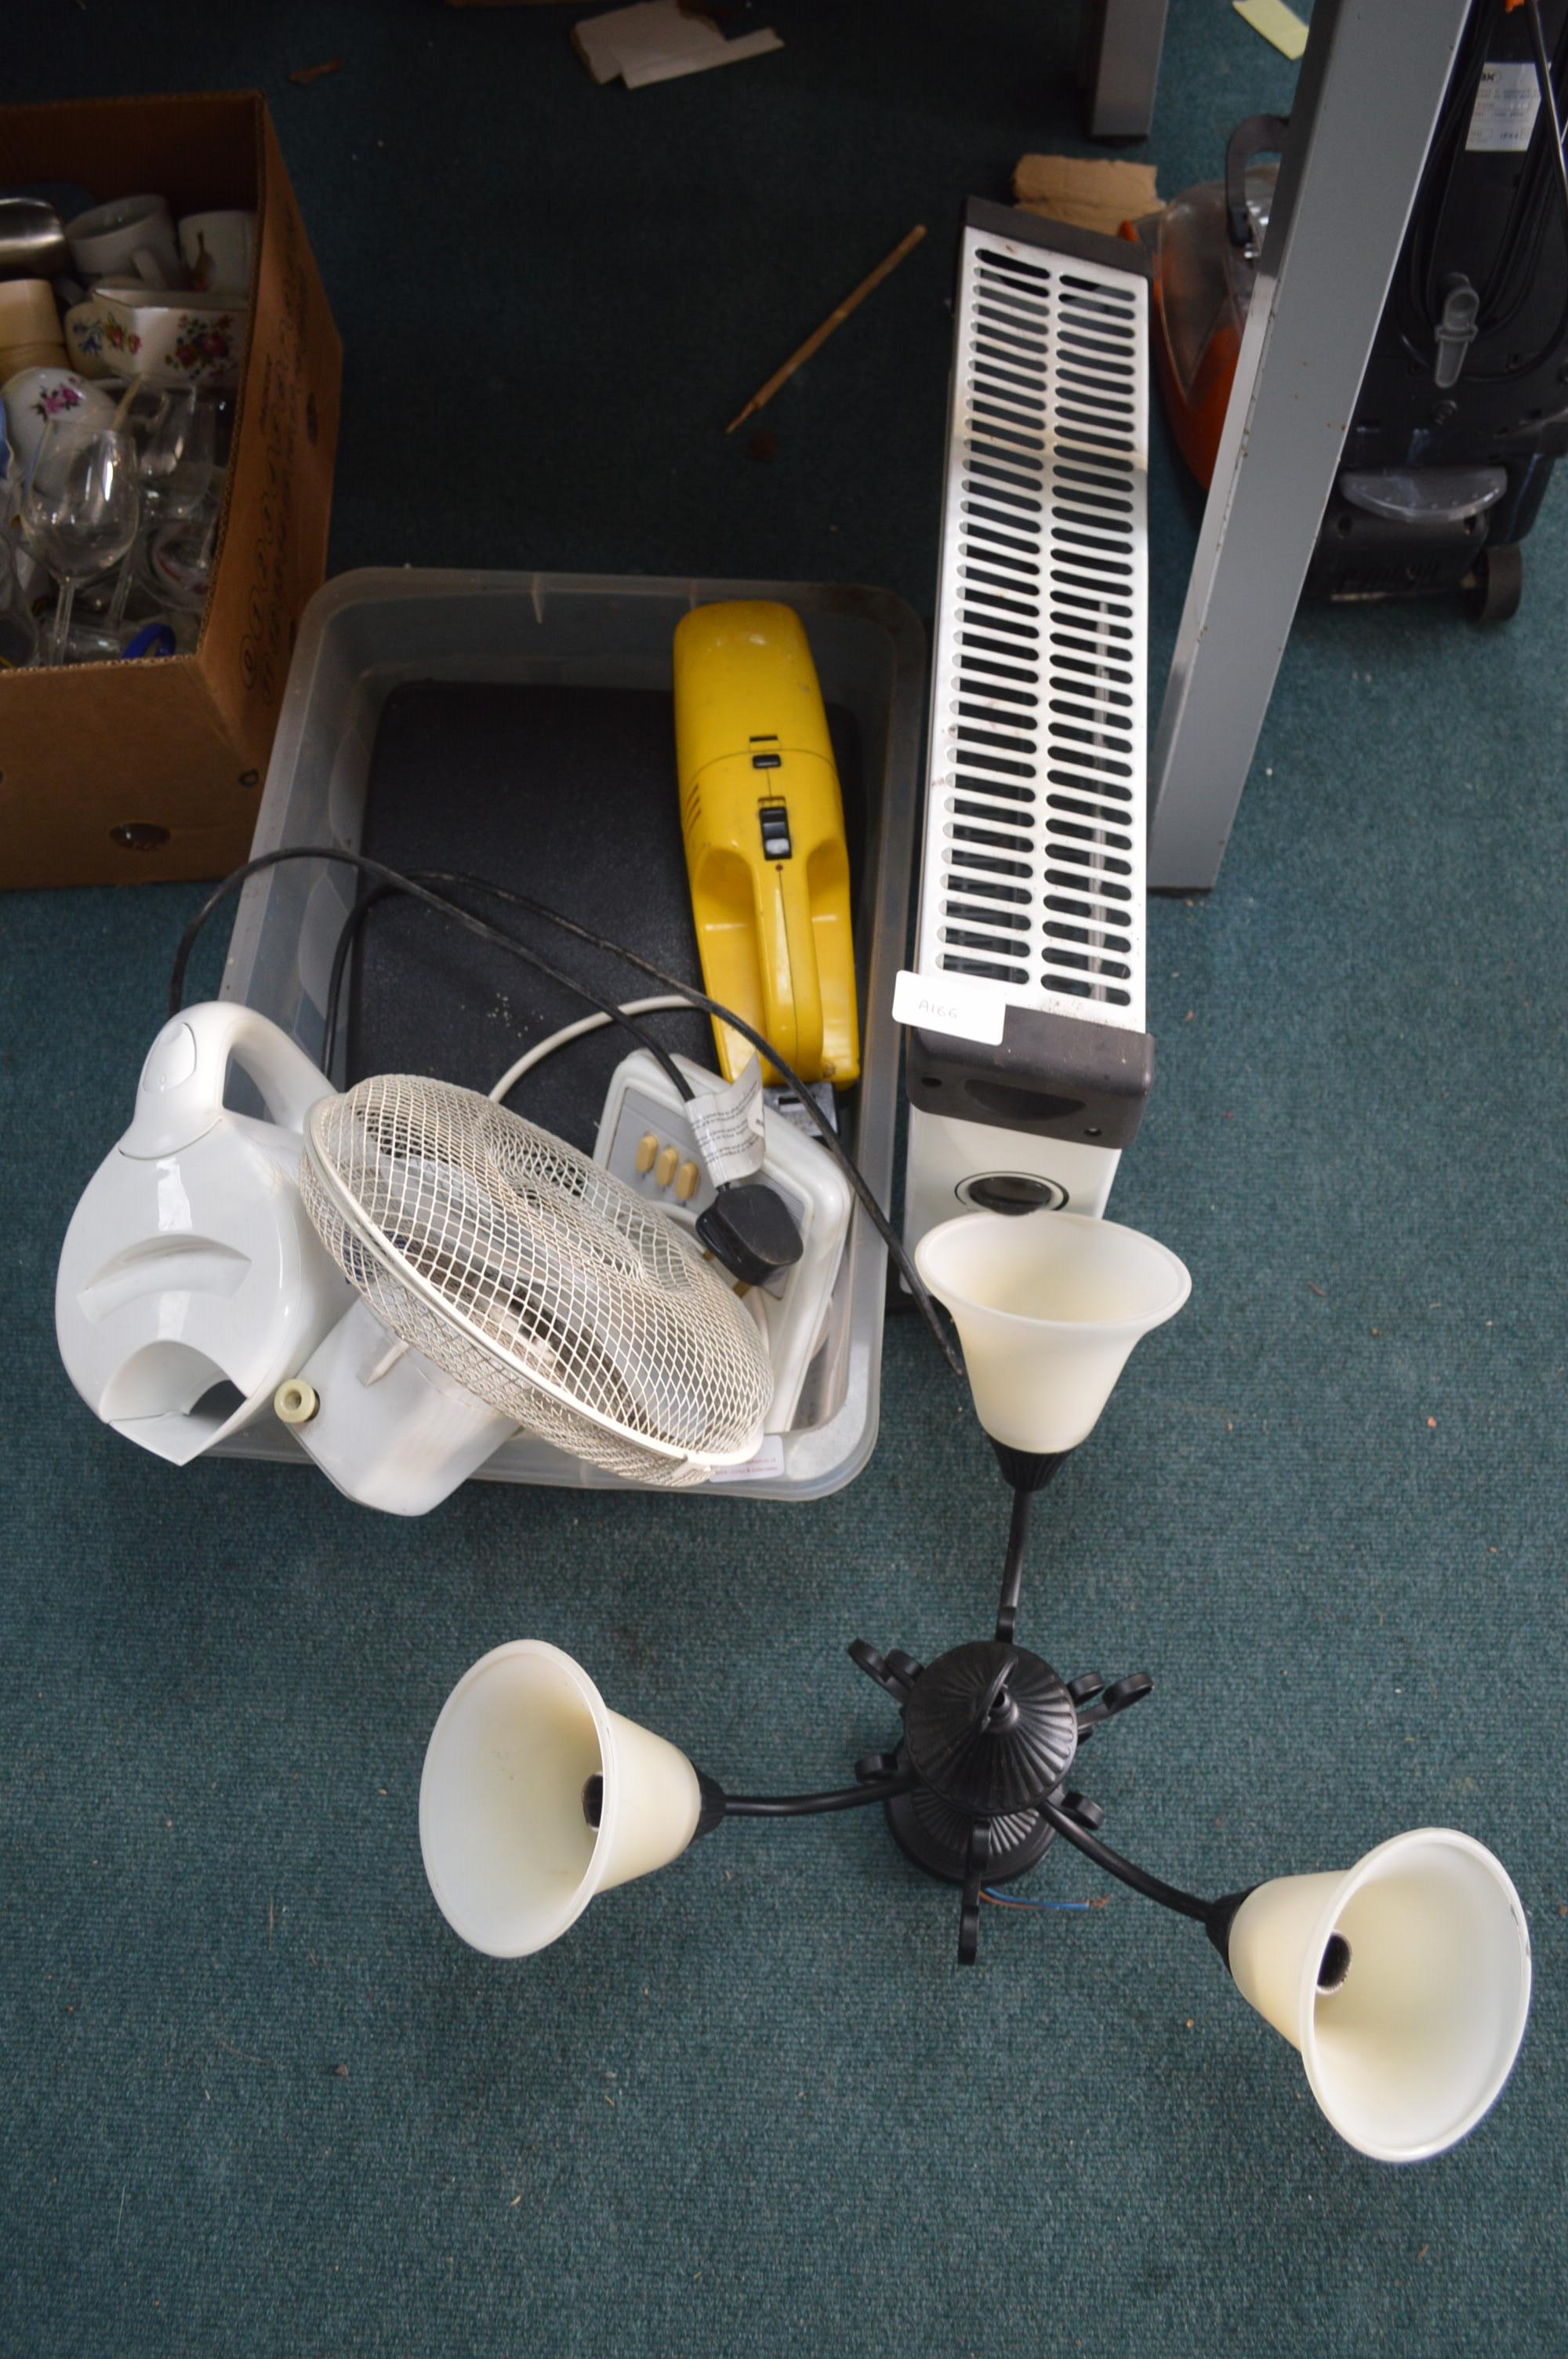 Electrical Items; Fans, Light Fitting, Heater, etc